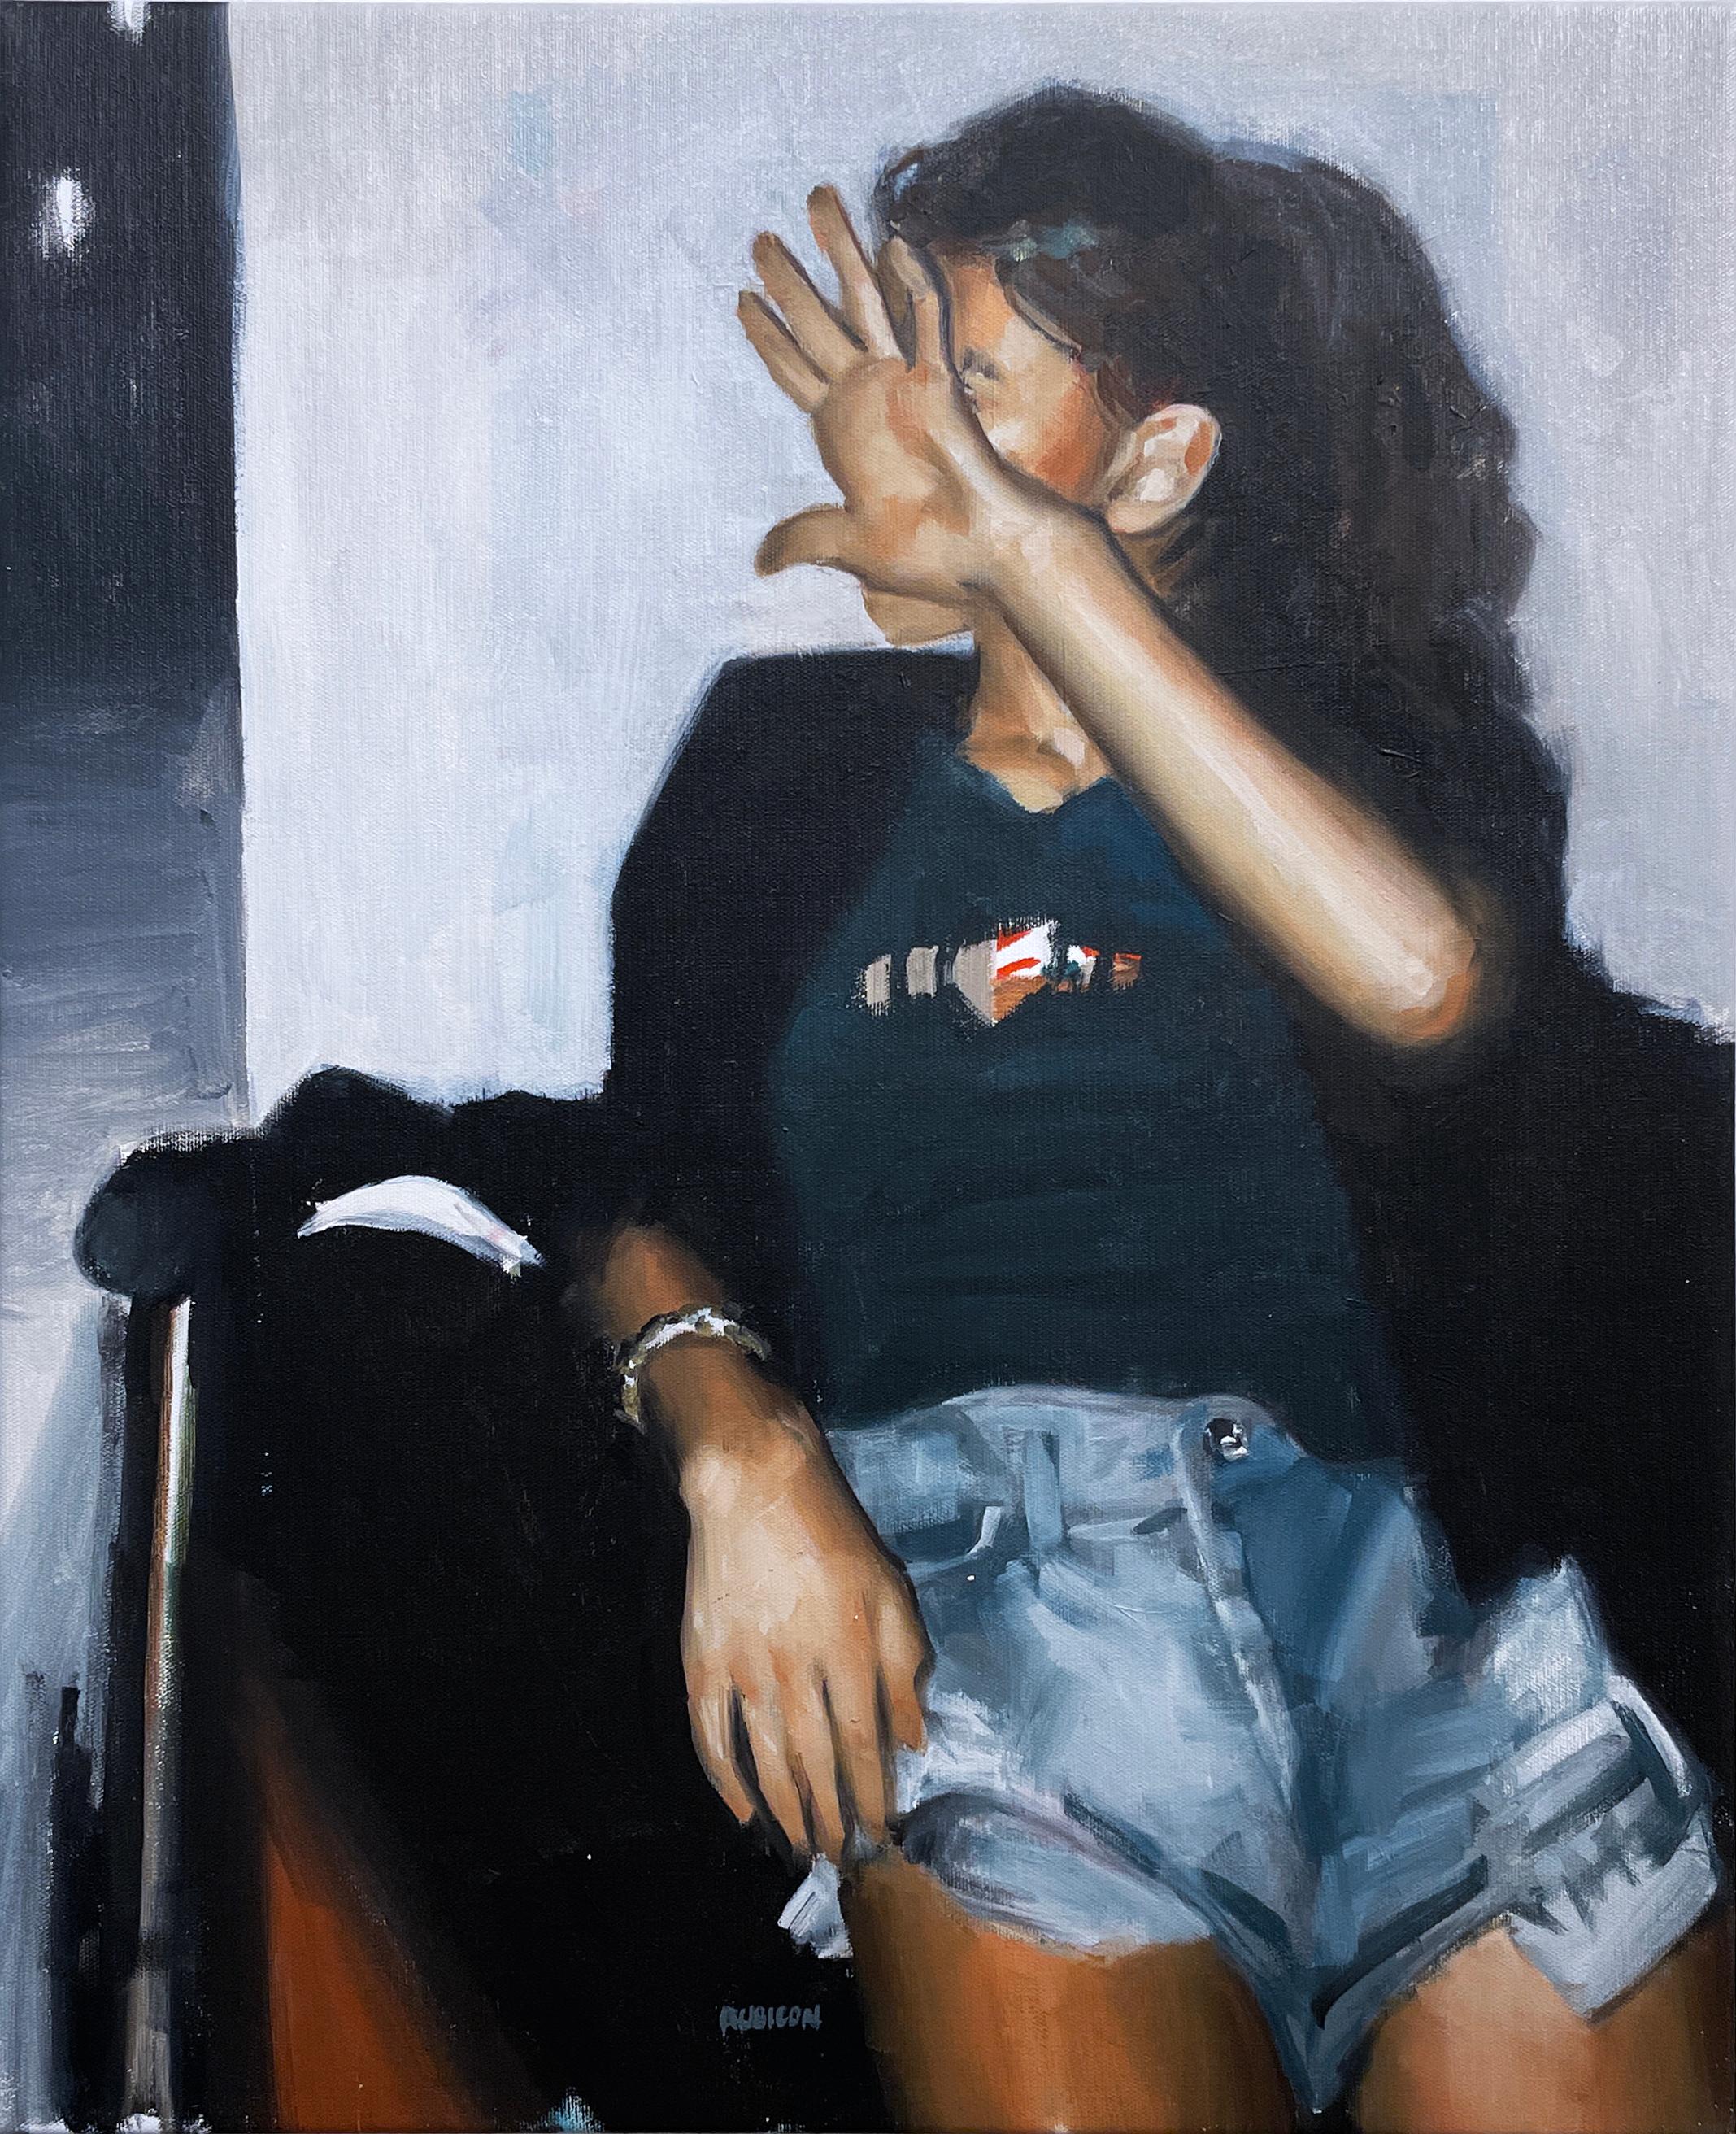 No Flash (2022) oil on canvas, figurative, snapshot of woman, hand hiding face  - Painting by RU8ICON1